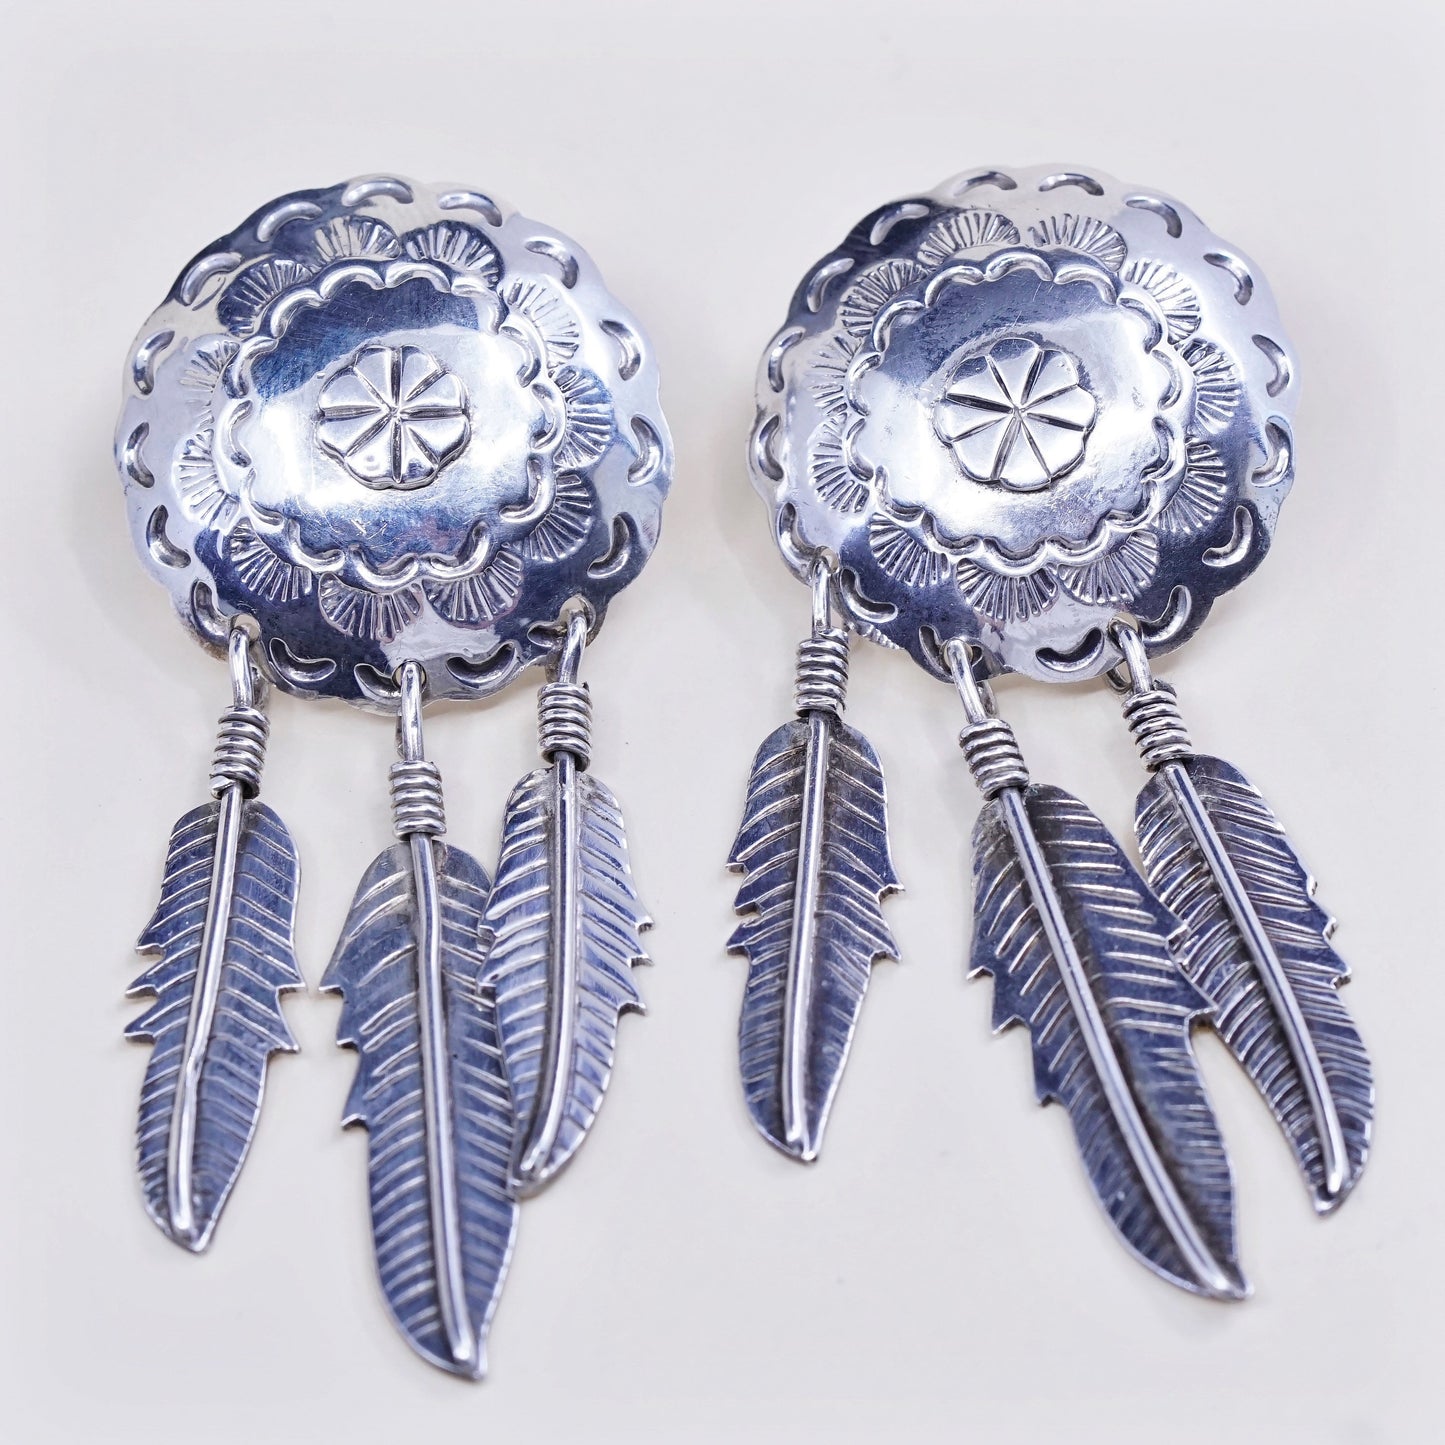 Vintage southwestern Sterling silver handmade disc earrings with feather